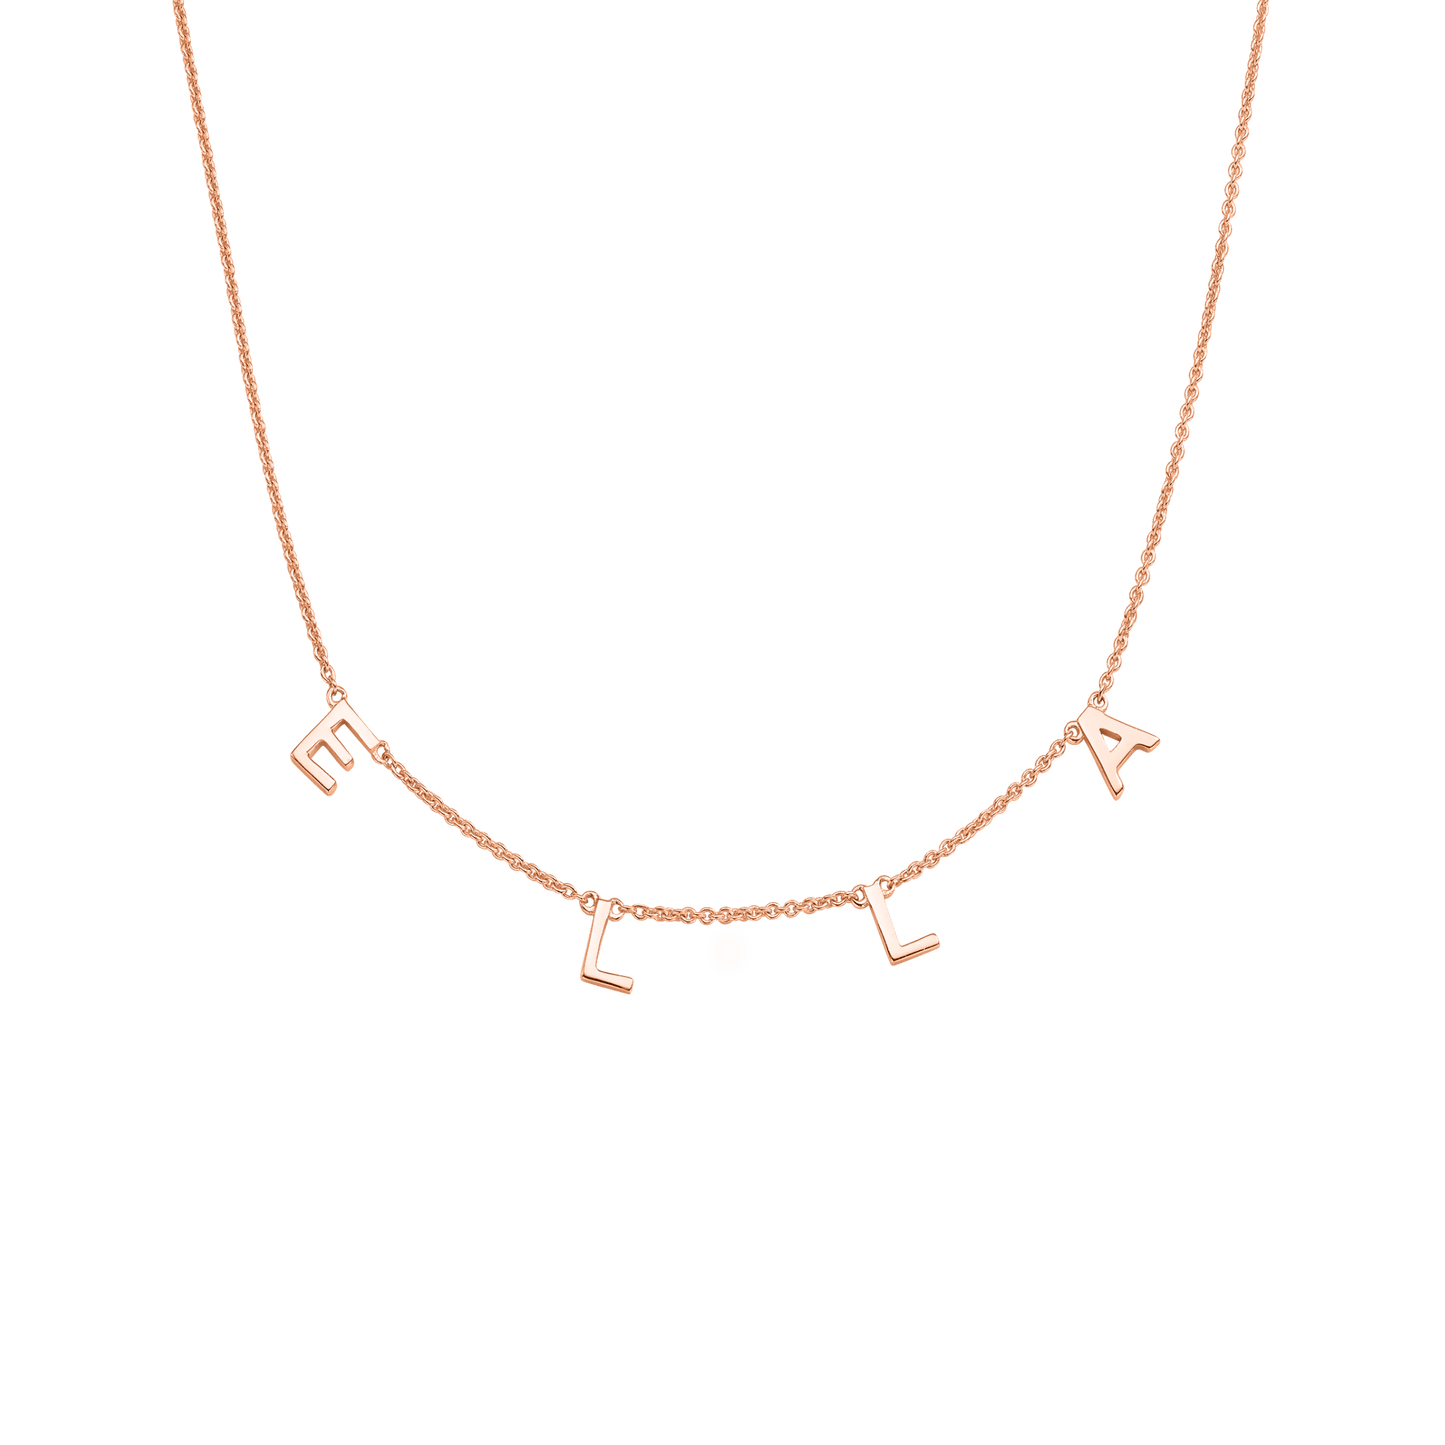 Name Necklace - 14K White Gold Necklaces magal-dev 